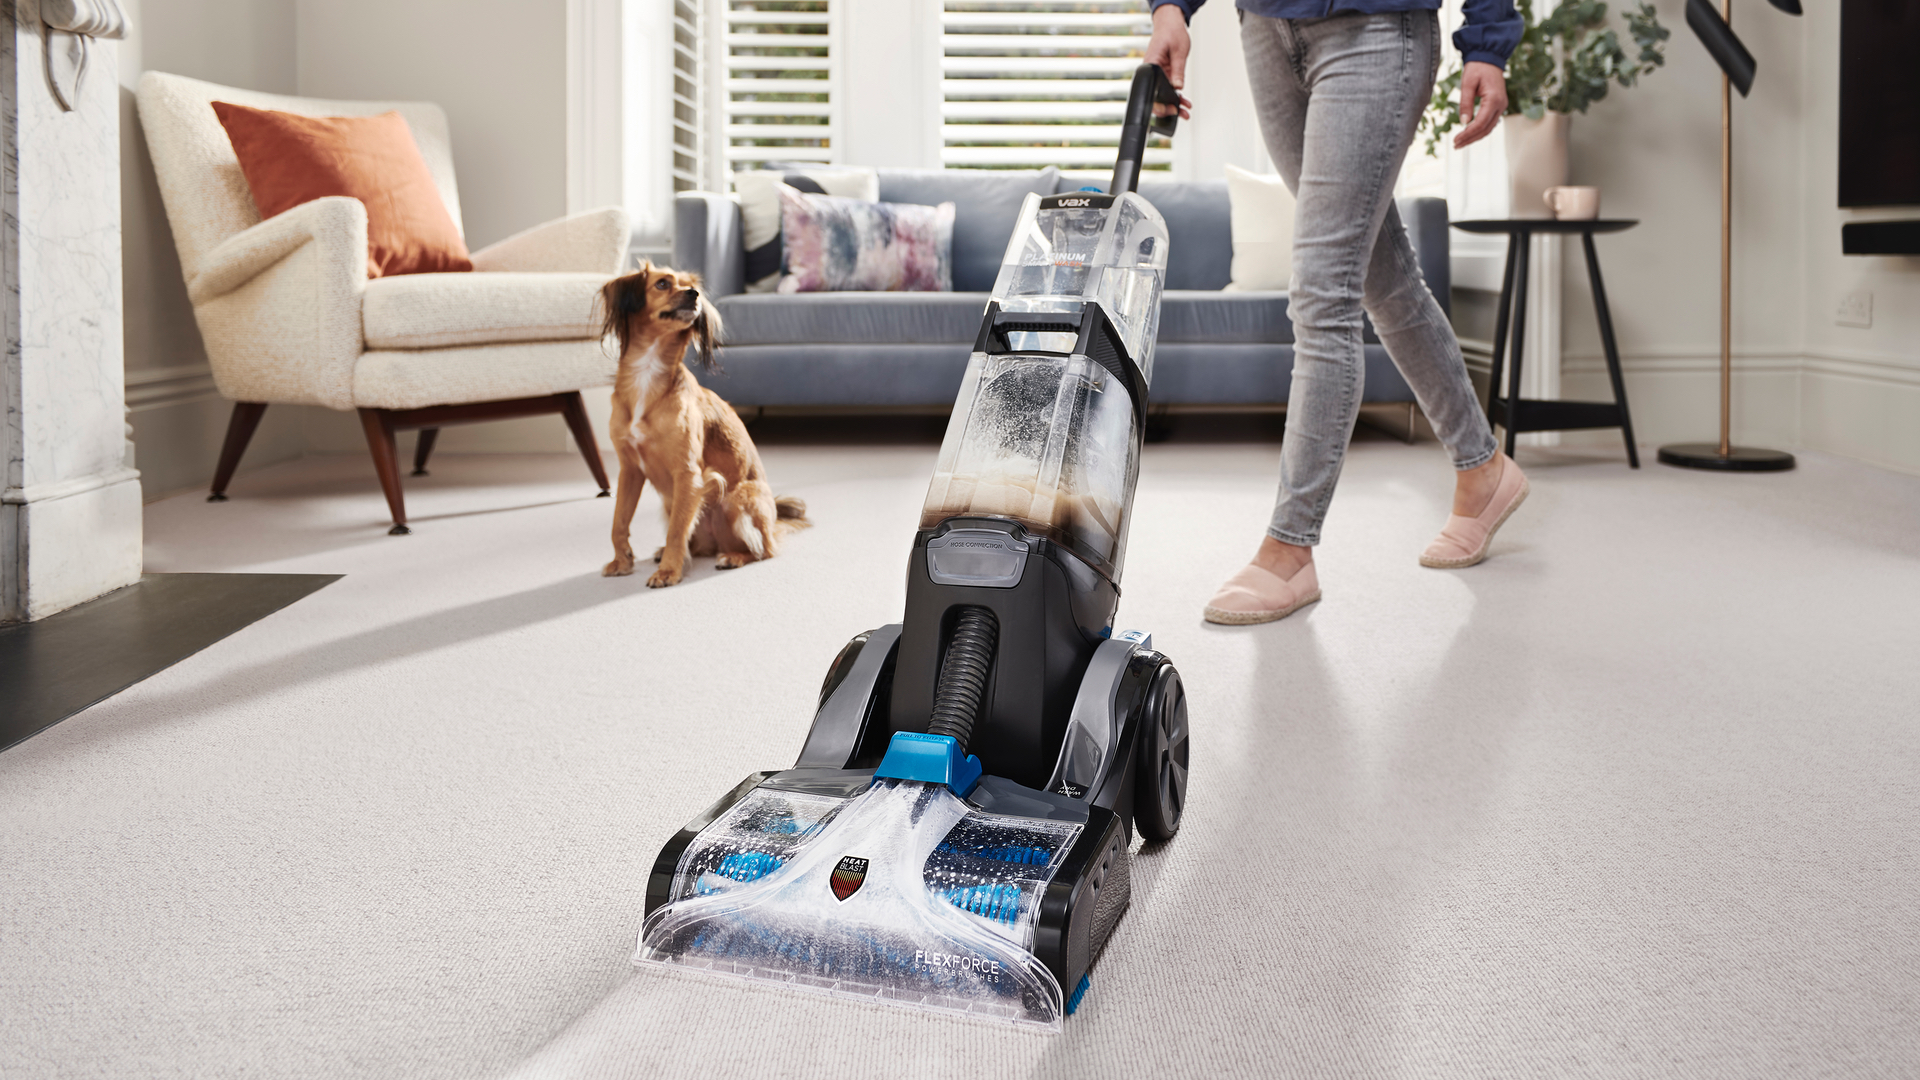 commercial carpet cleaning near me in Colorado springs